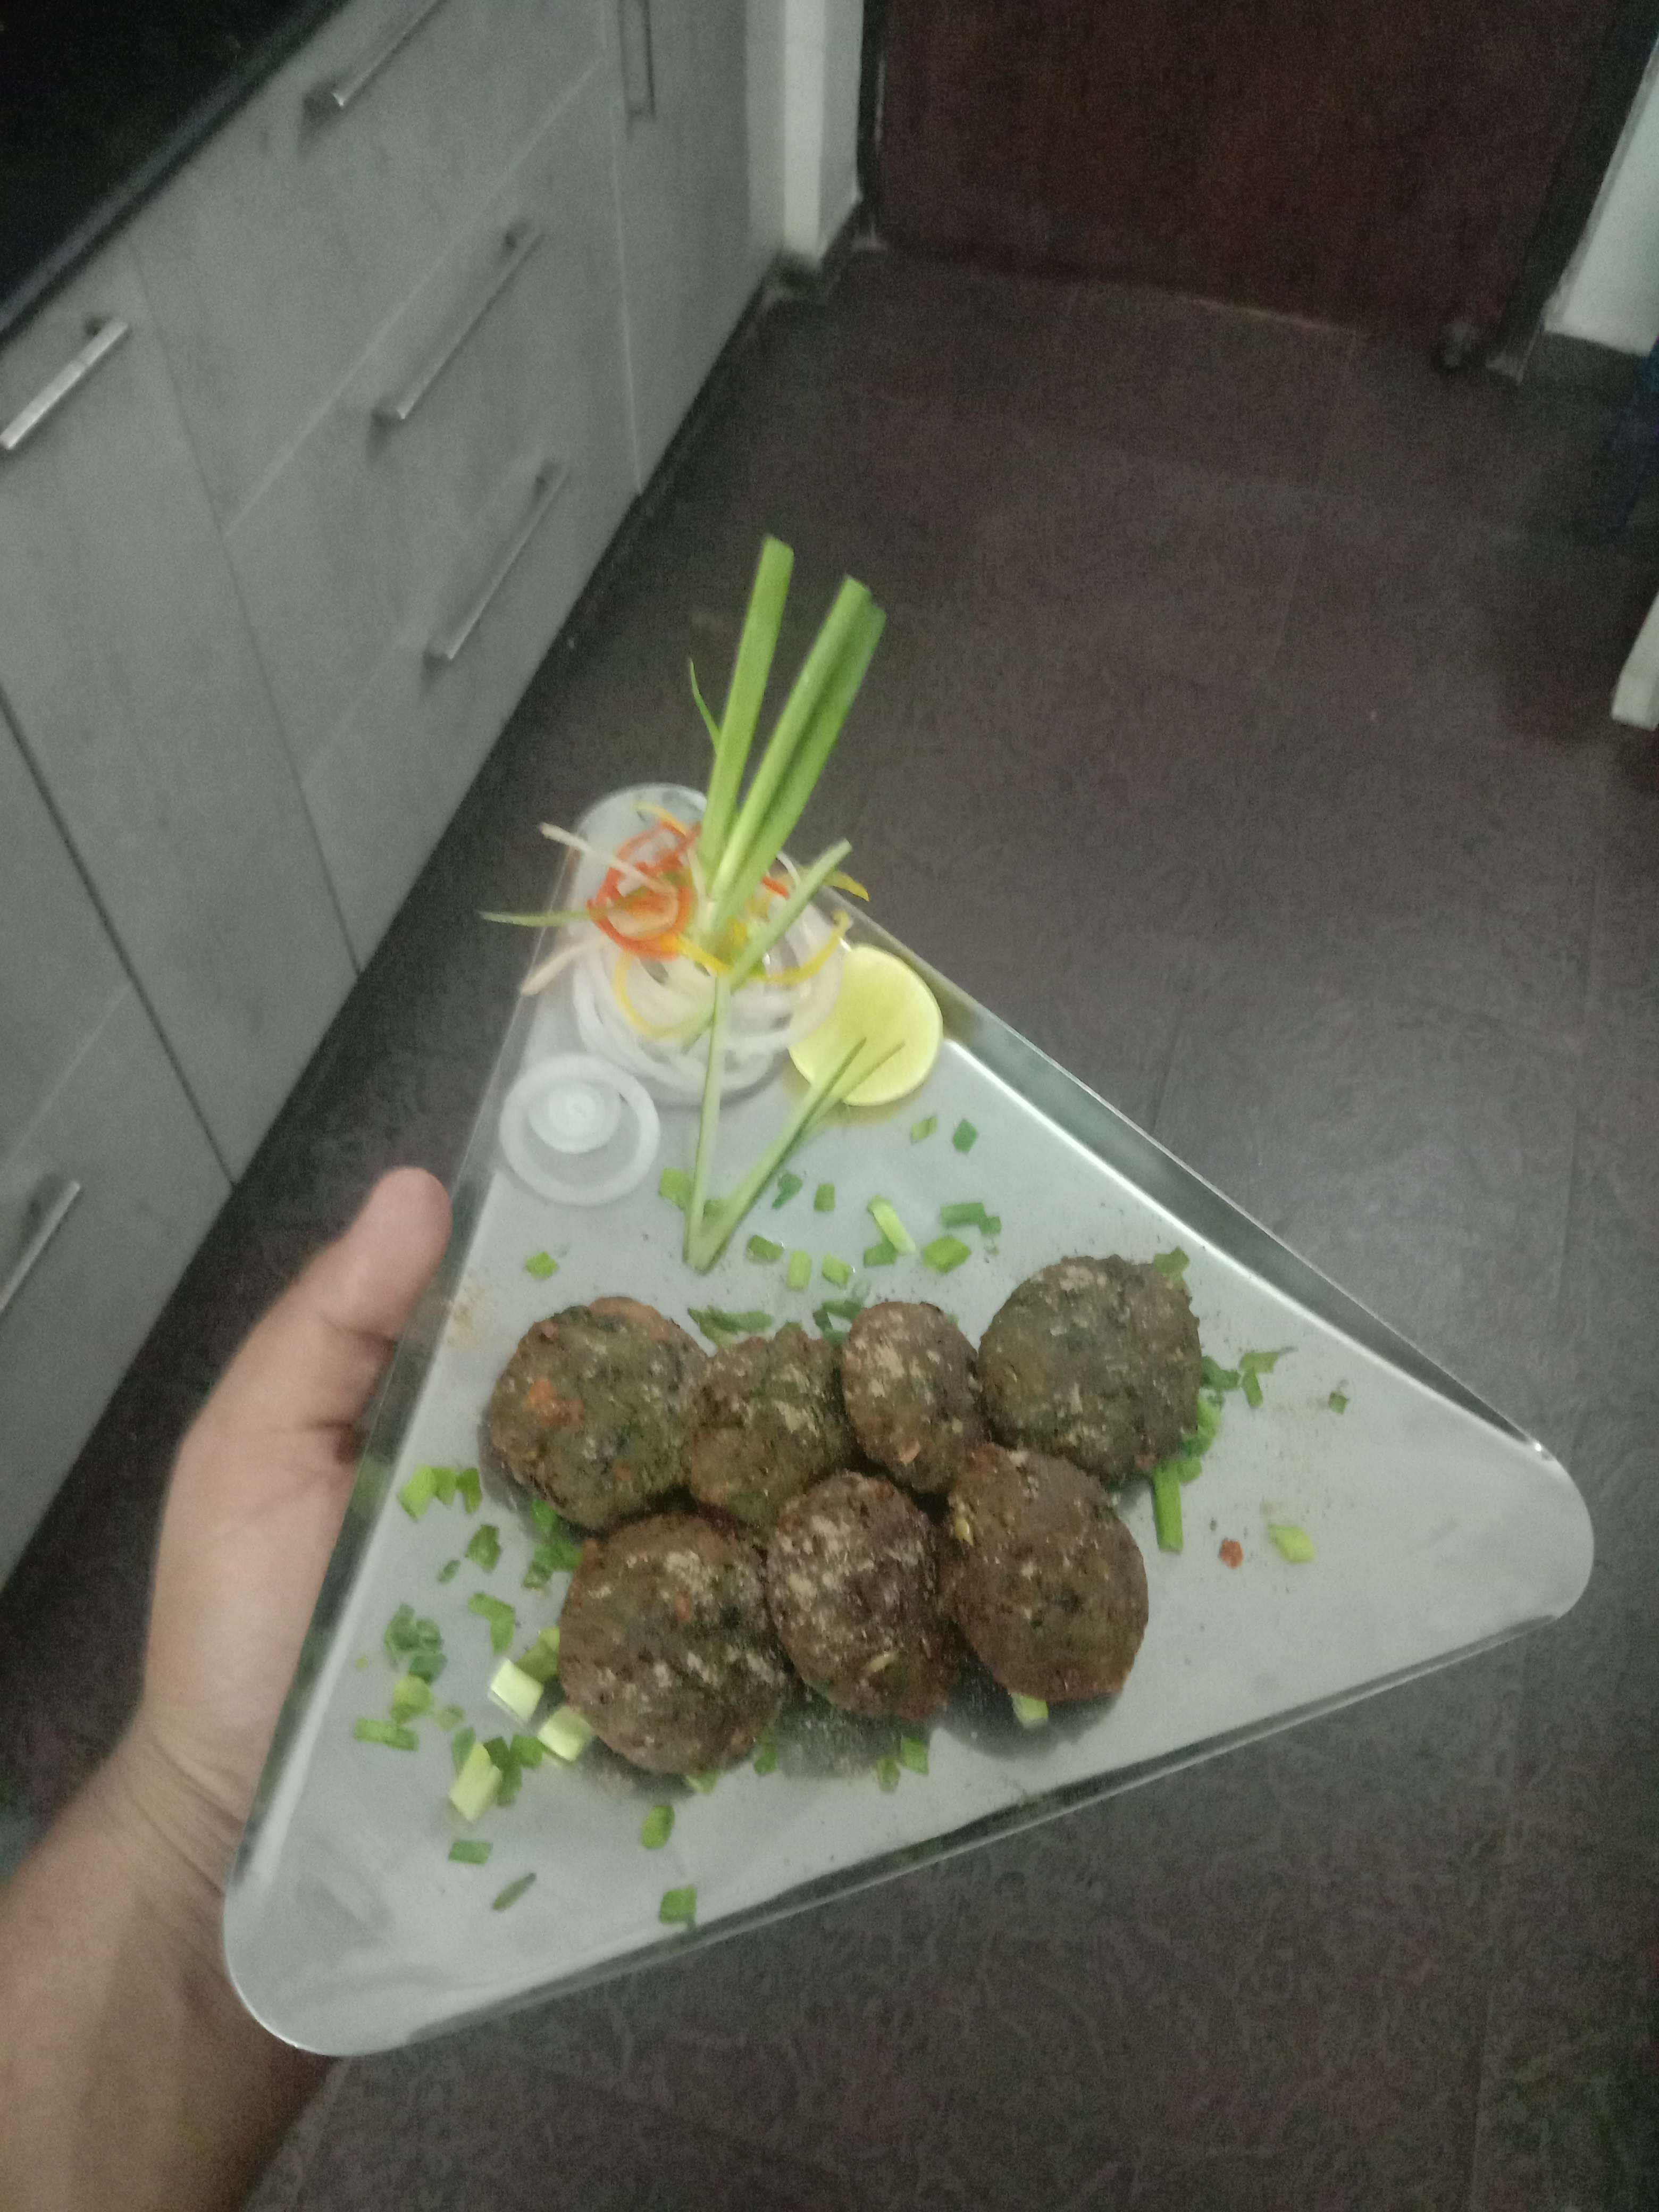 Tasty Hariyali Kebab cooked by COOX chefs cooks during occasions parties events at home